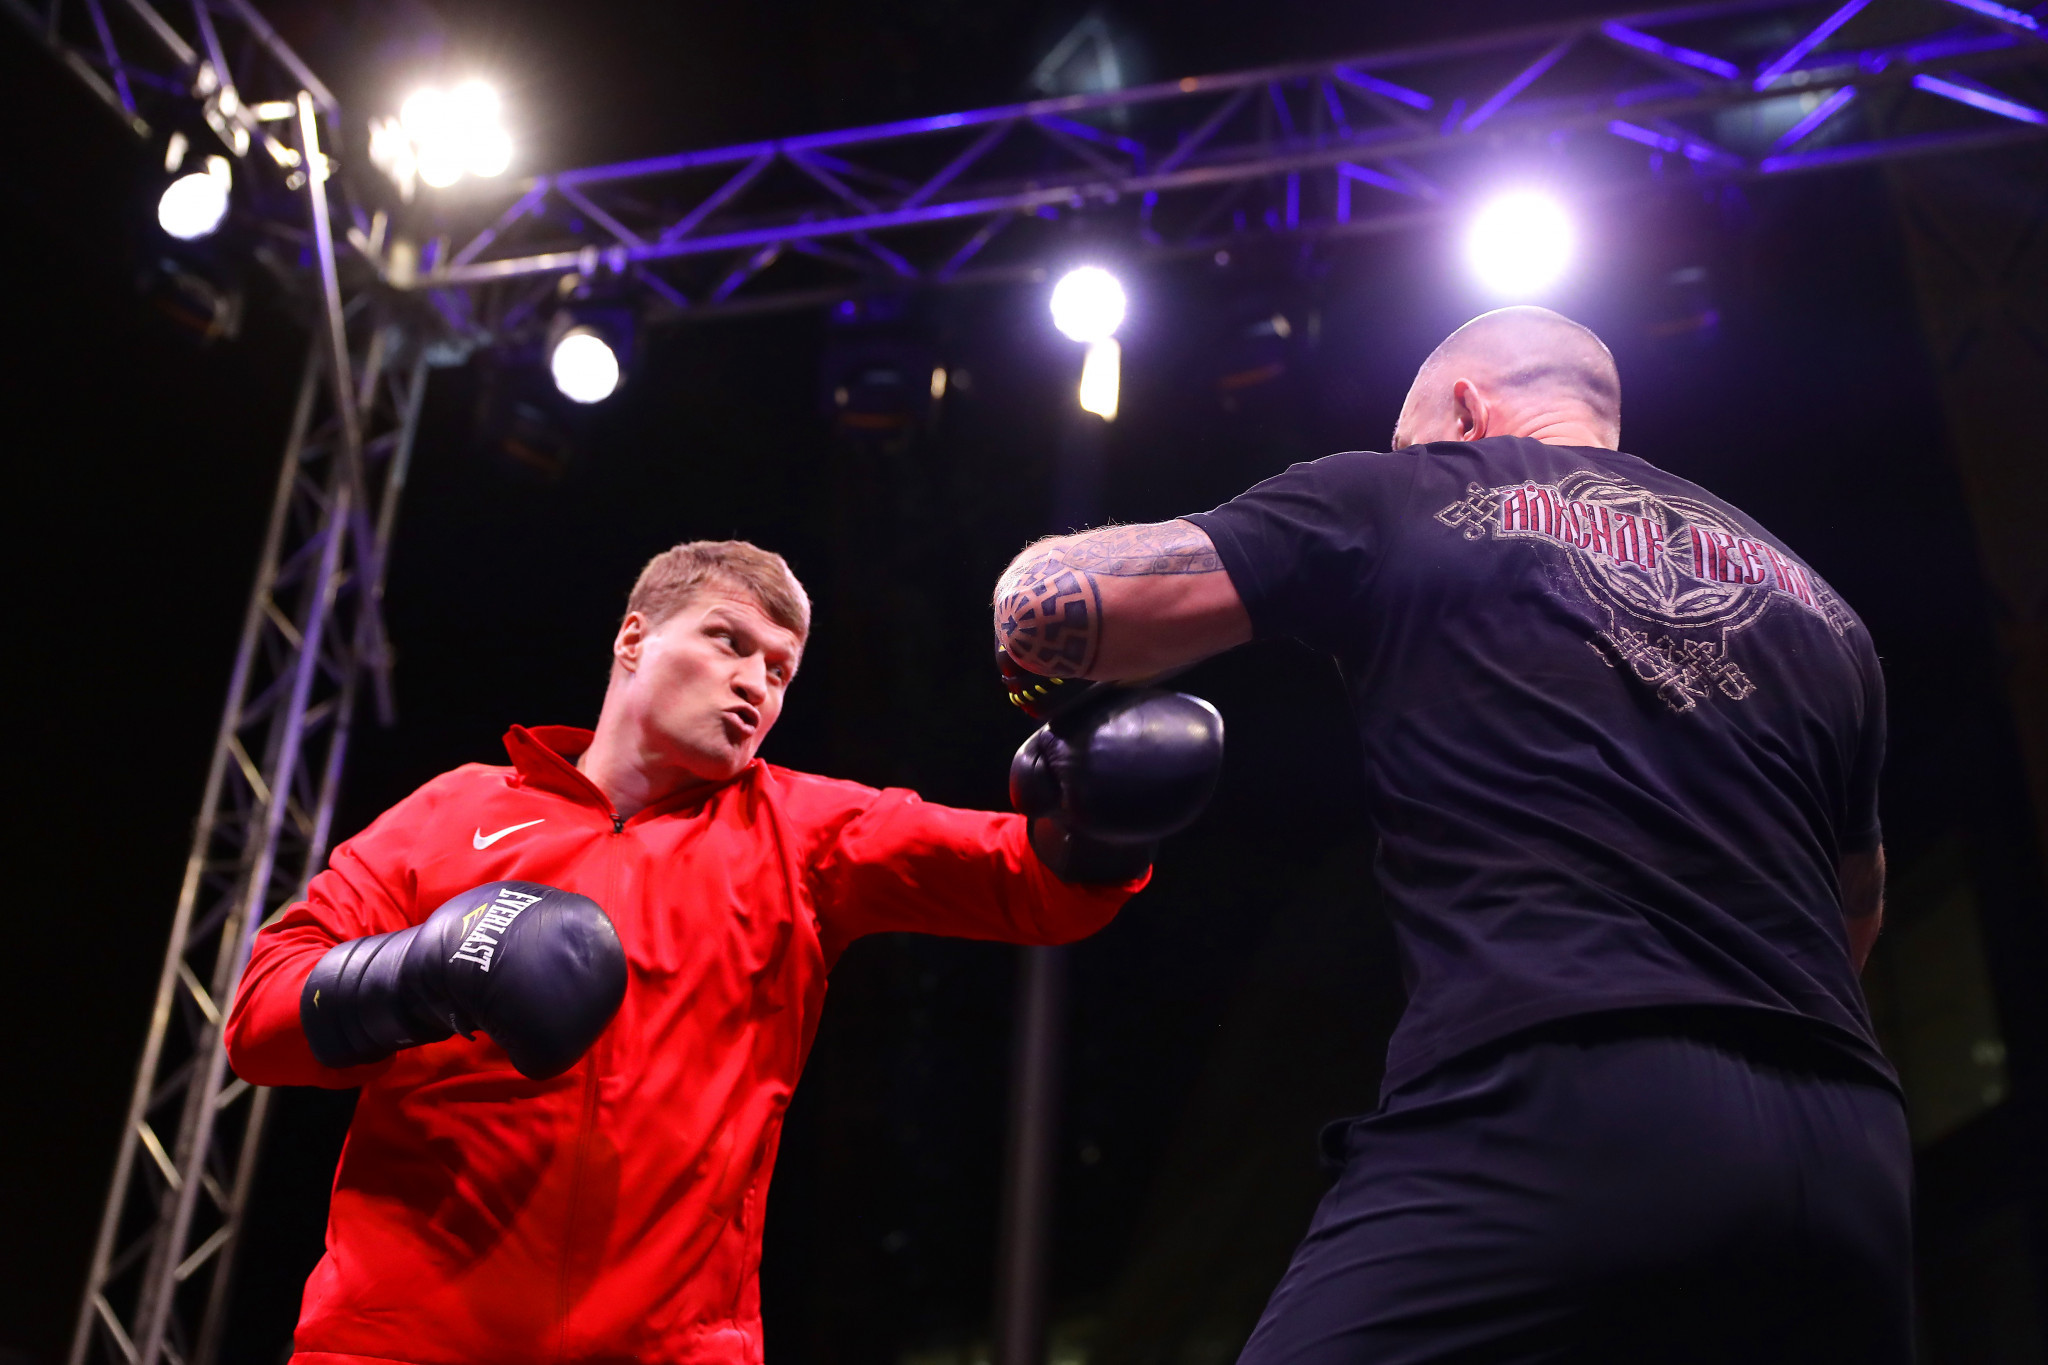 Alexander Povetkin (in red) caused a big upset at the weekend when he knocked out Dillian Whyte after he had been on the canvas himself earlier in the fight ©Getty Images